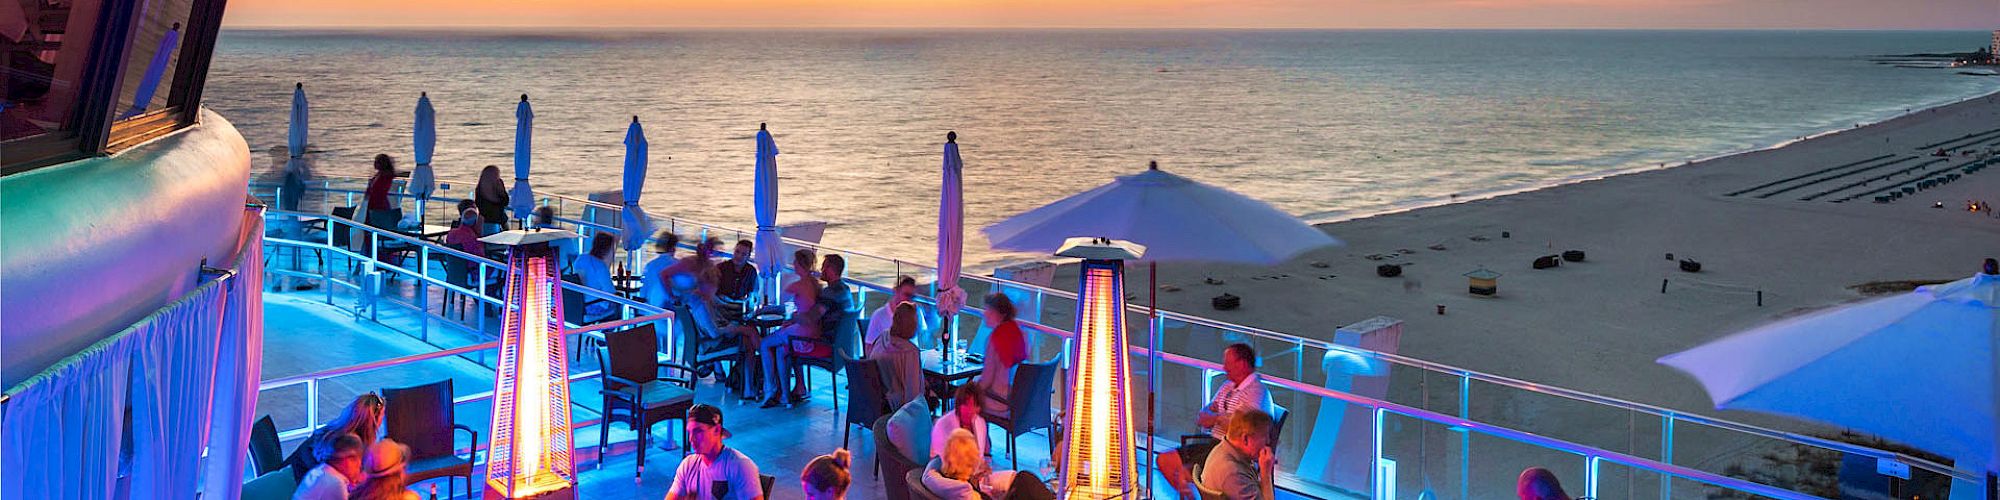 People are enjoying a rooftop patio with tables, heaters, and umbrellas, overlooking a beach at sunset with a colorful sky.